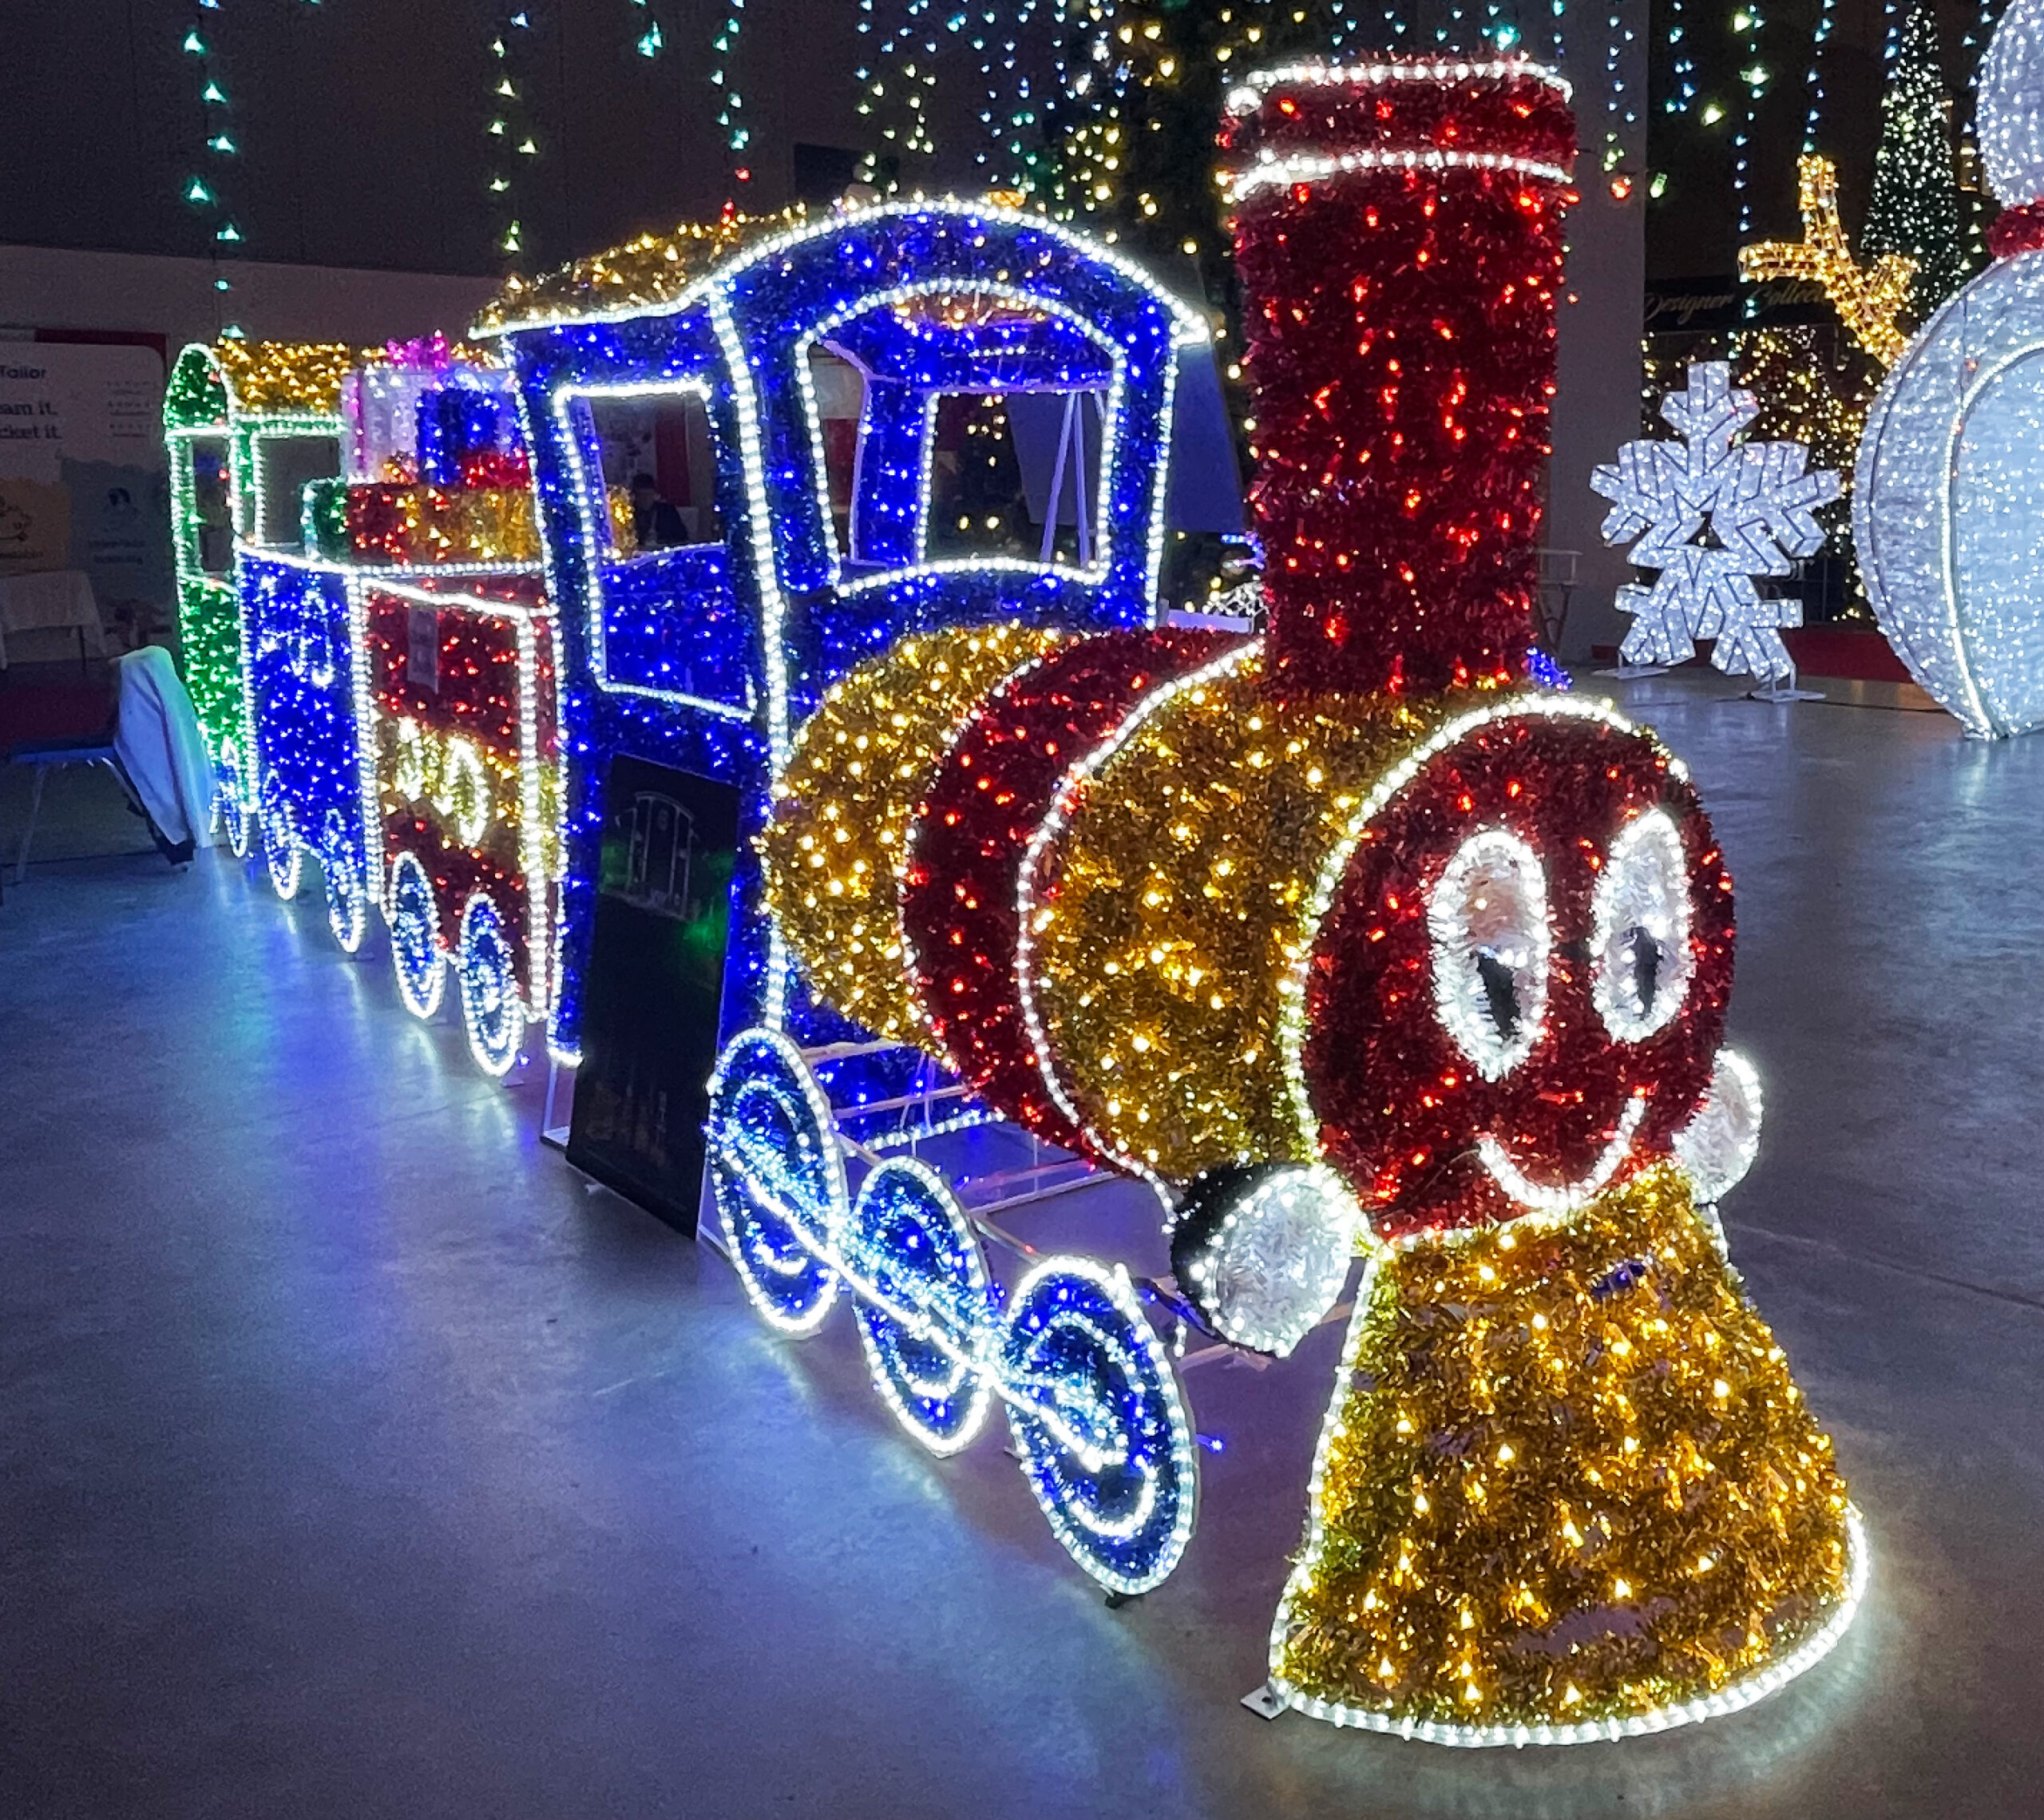 LED lighted toy train feature